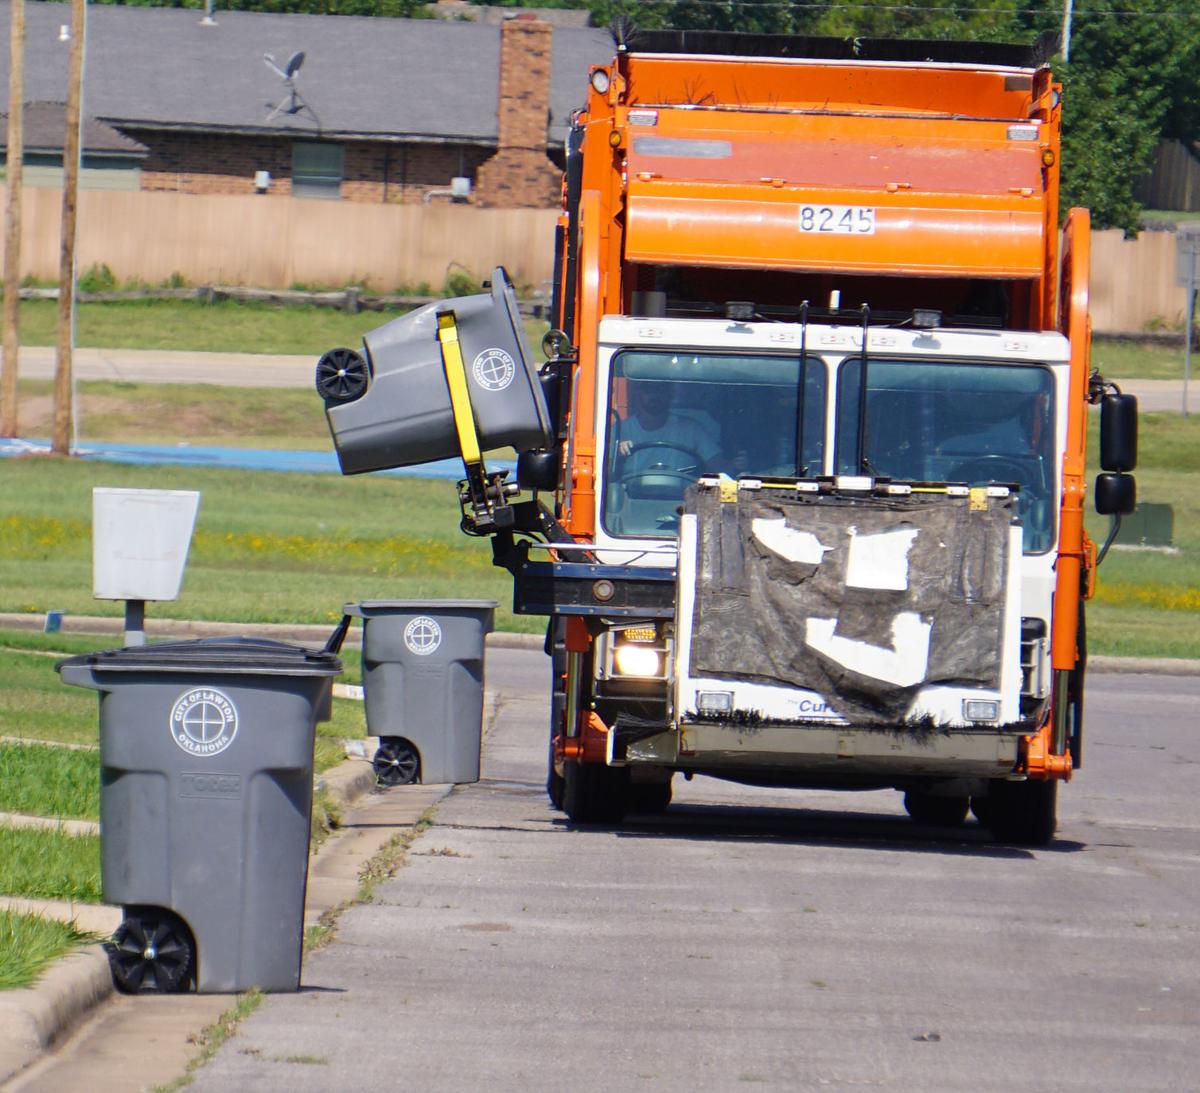 Lawton to launch once-a-week residential trash collection system on Monday  | News | swoknews.com